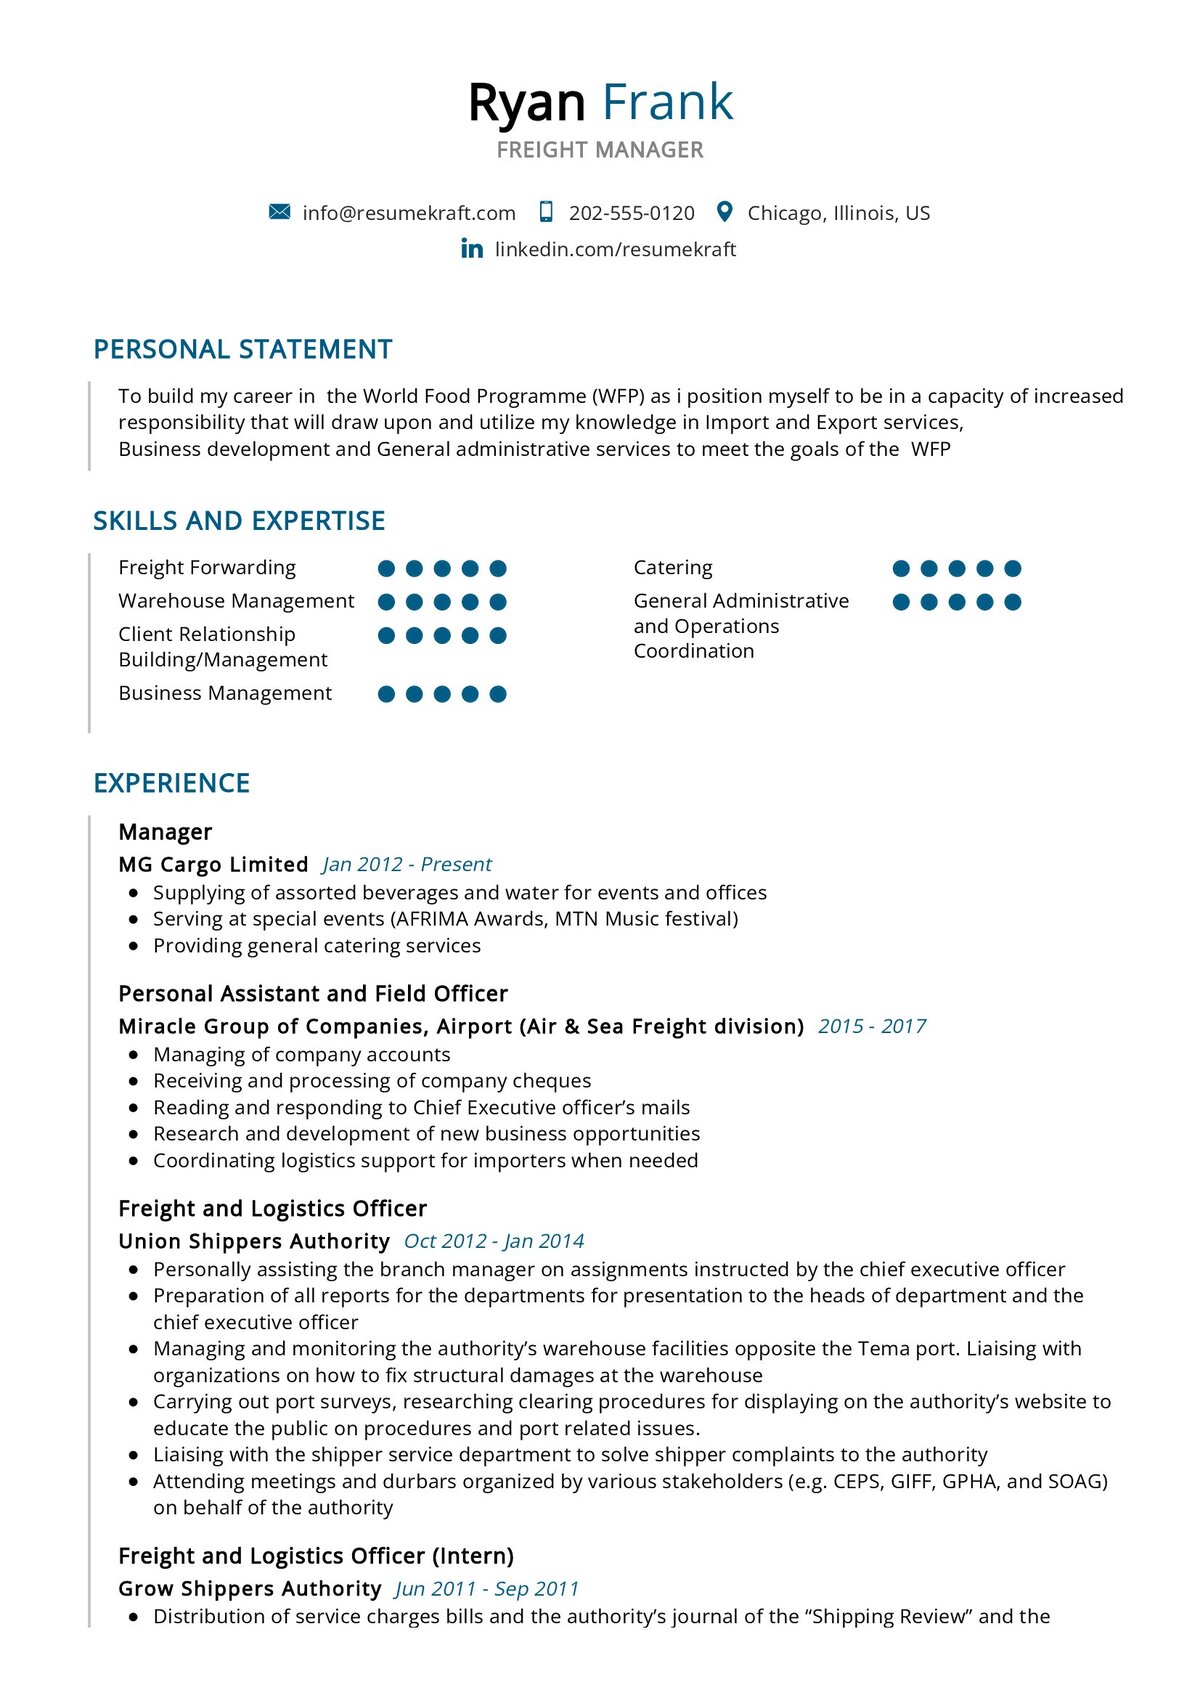 Freight Manager Resume Example